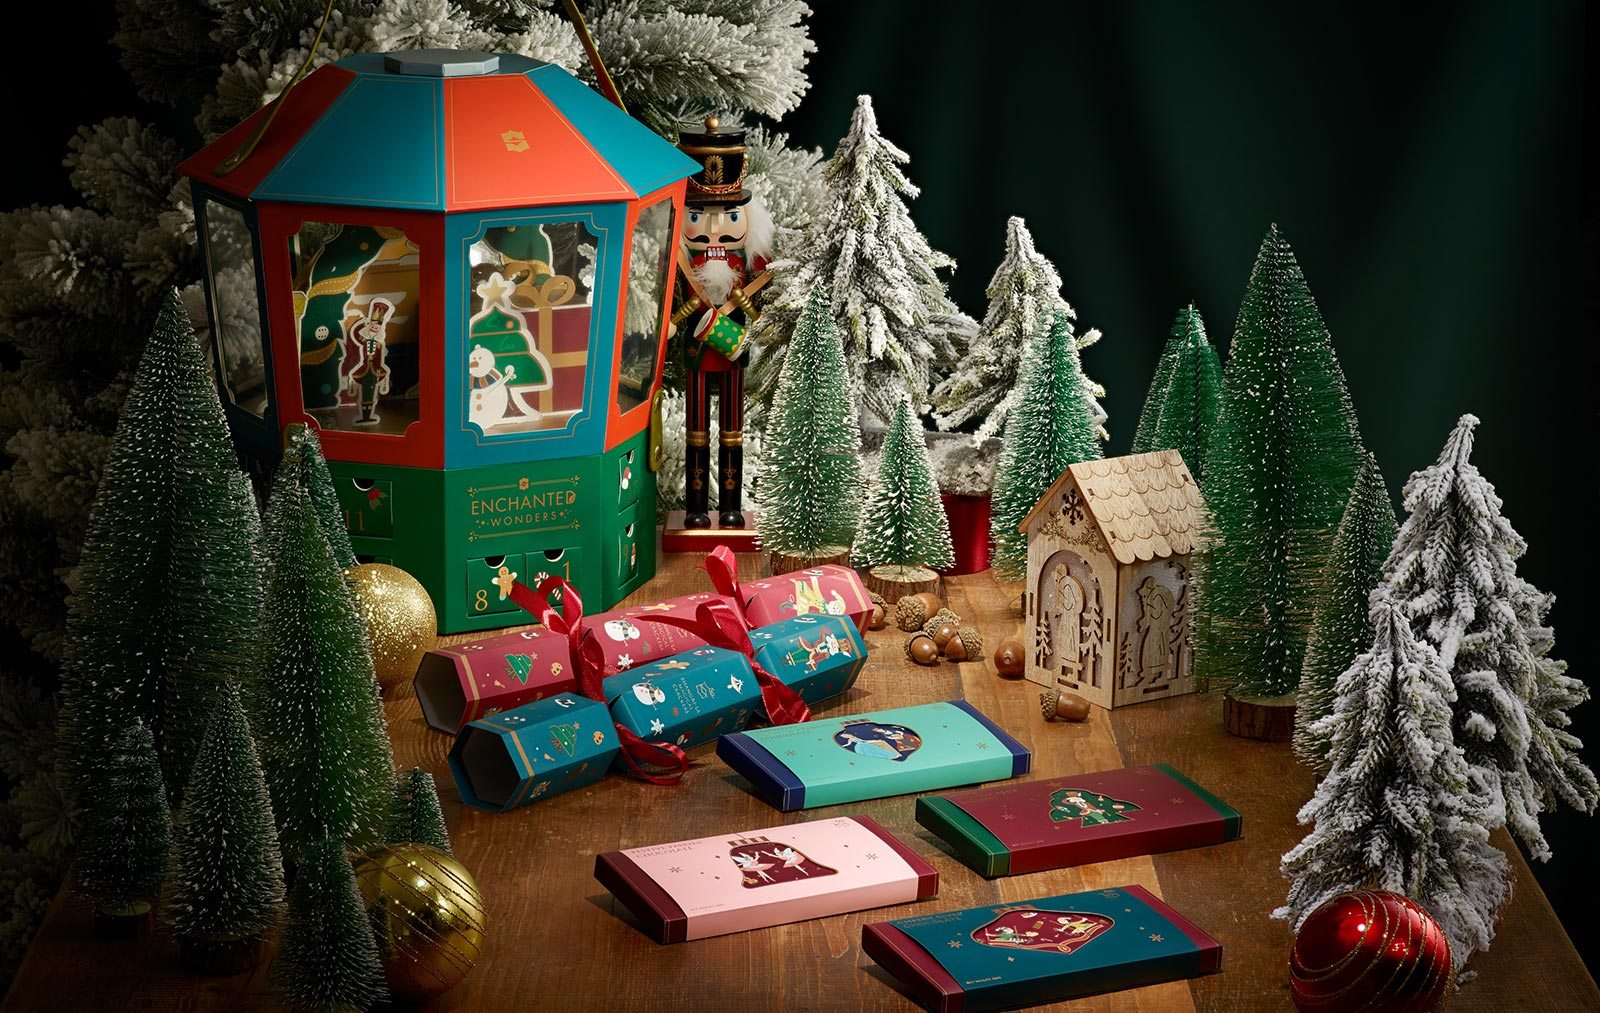 festive items available to purchase at the shangri la christmas market